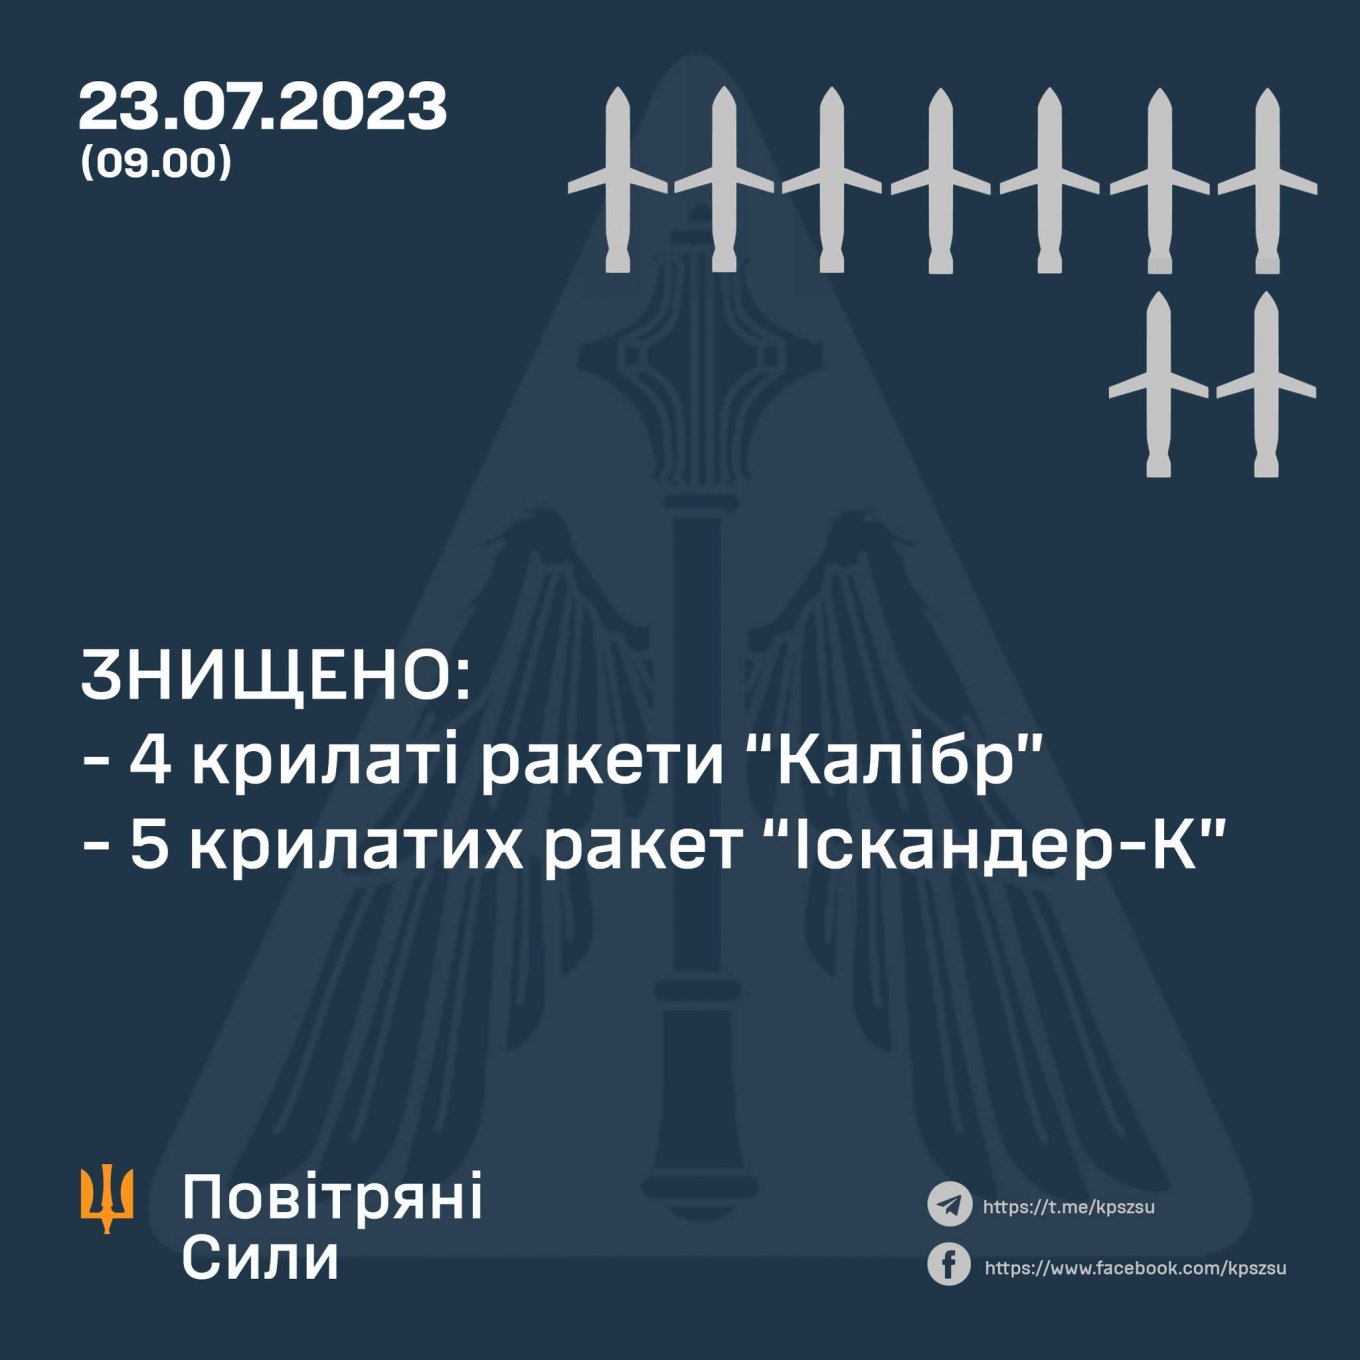 Ukrainian air defence forces destroyed nine air targets: 4 Kalibr and 5 Iskander-K missiles, the Air Force Command of the Armed Forces of Ukraine reports, Defense Express